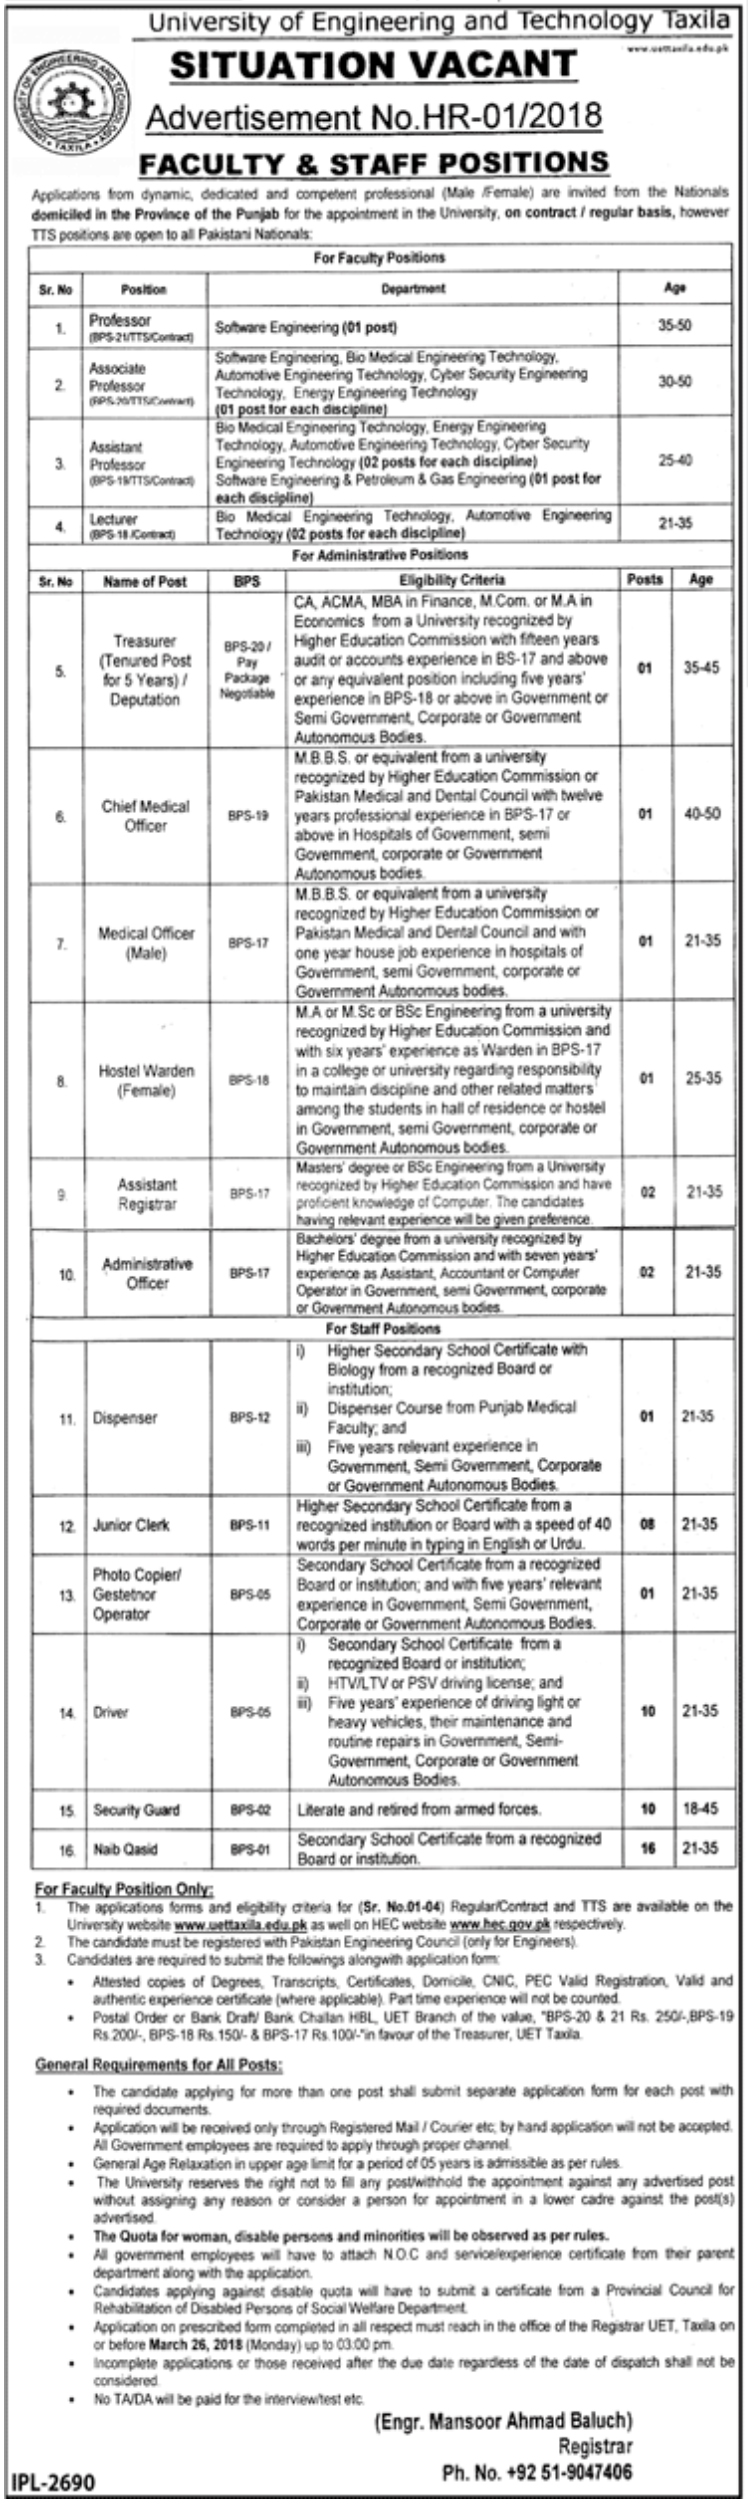 University of Engineering and Technology Taxila Jobs 05 March 2018 Daily Jang Newspaper